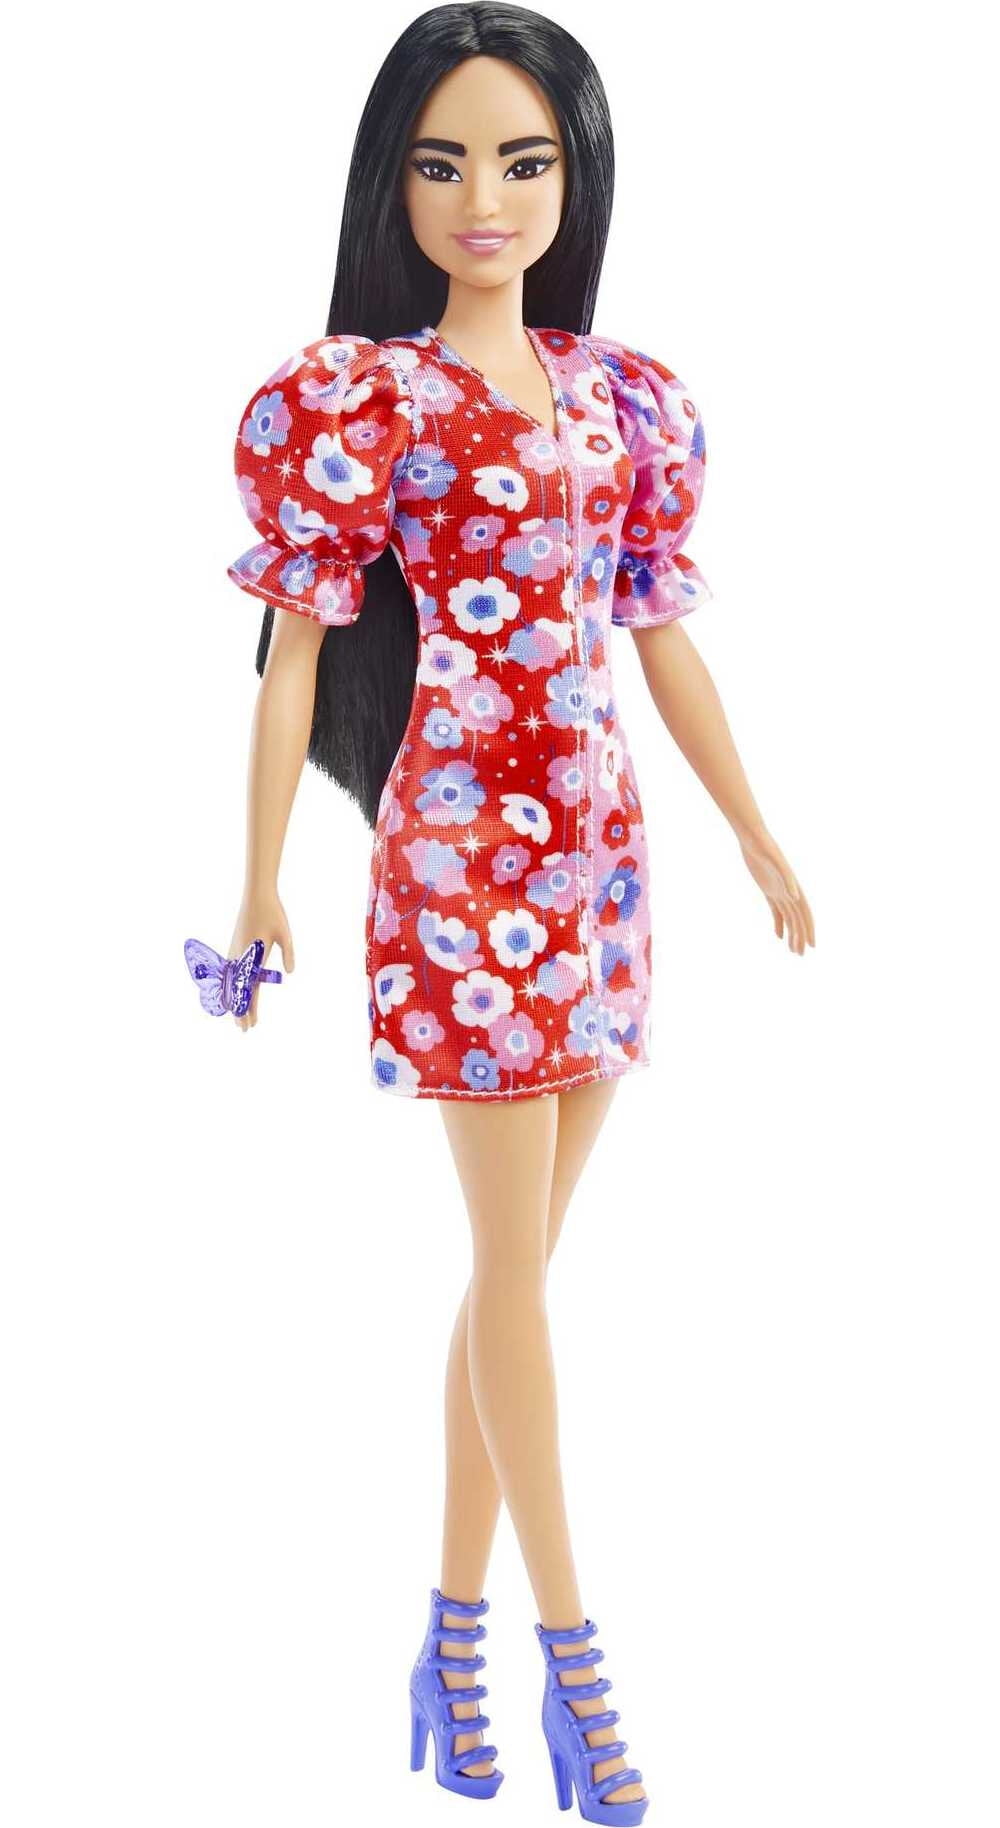 Barbie Fashionistas Doll #177 with Black Hair in Floral Dress & Strappy ...